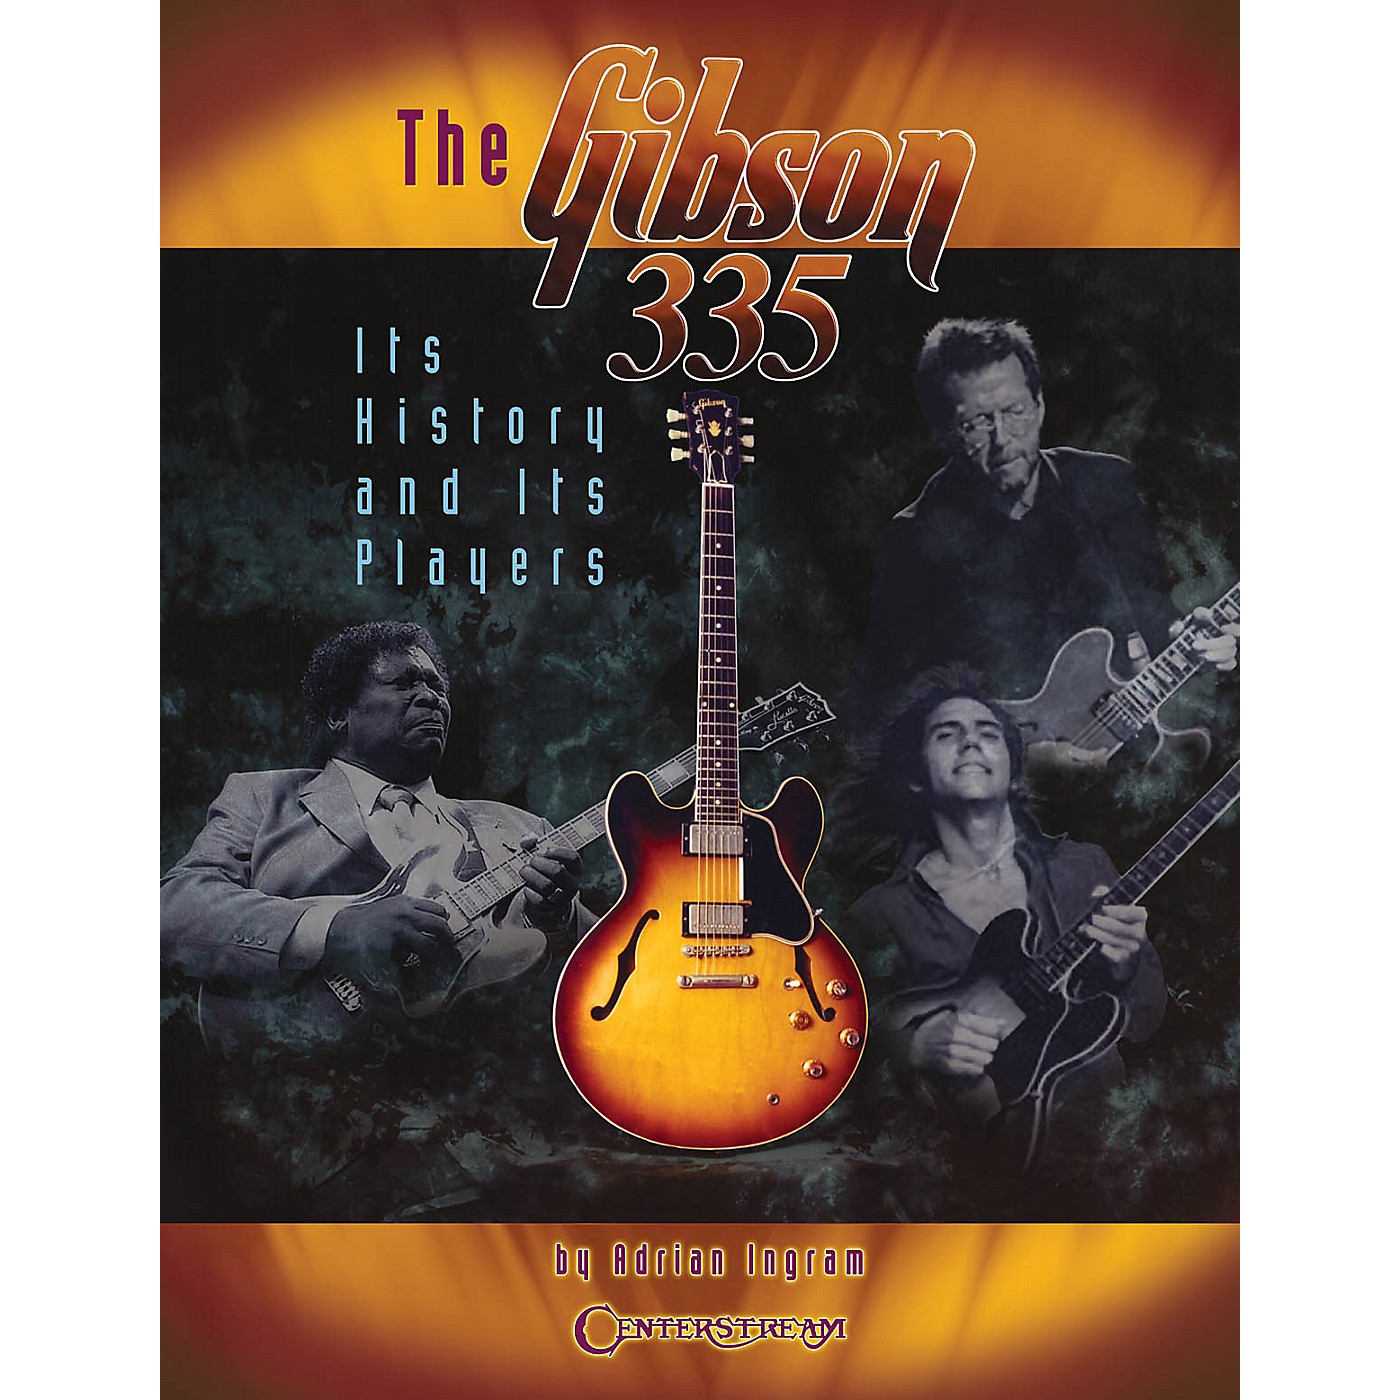 Centerstream Publishing The Gibson 335 (Its History and Its Players) Guitar Series Written by Adrian Ingram thumbnail